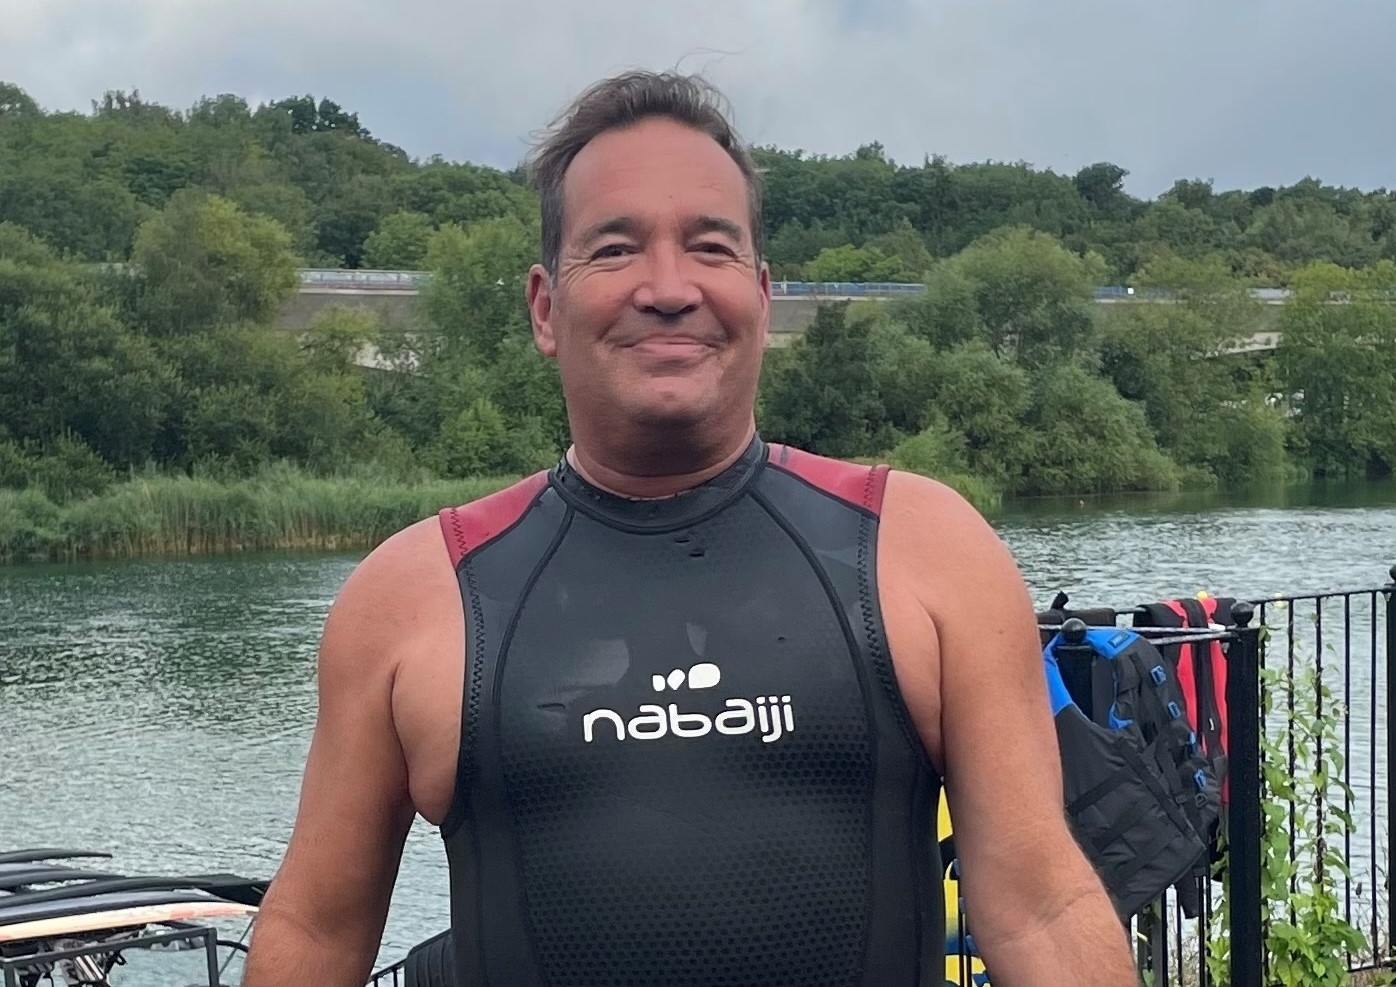 Determined dad living with motor neurone disease embarks on Guinness World Record swim